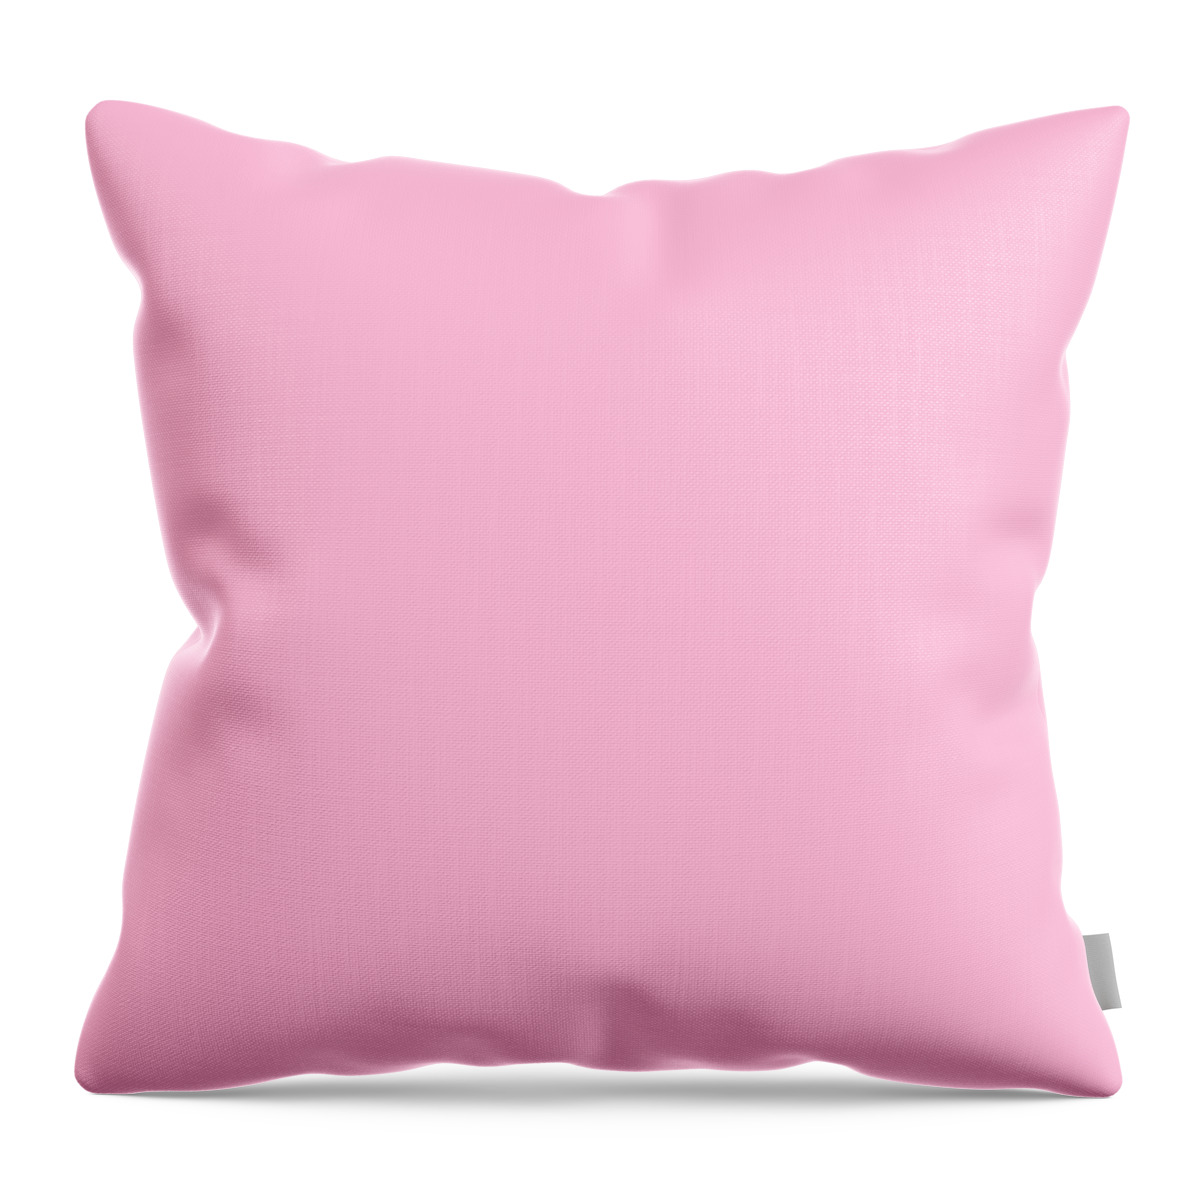 Cotton Candy Throw Pillow featuring the digital art Cotton Candy Colour by TintoDesigns